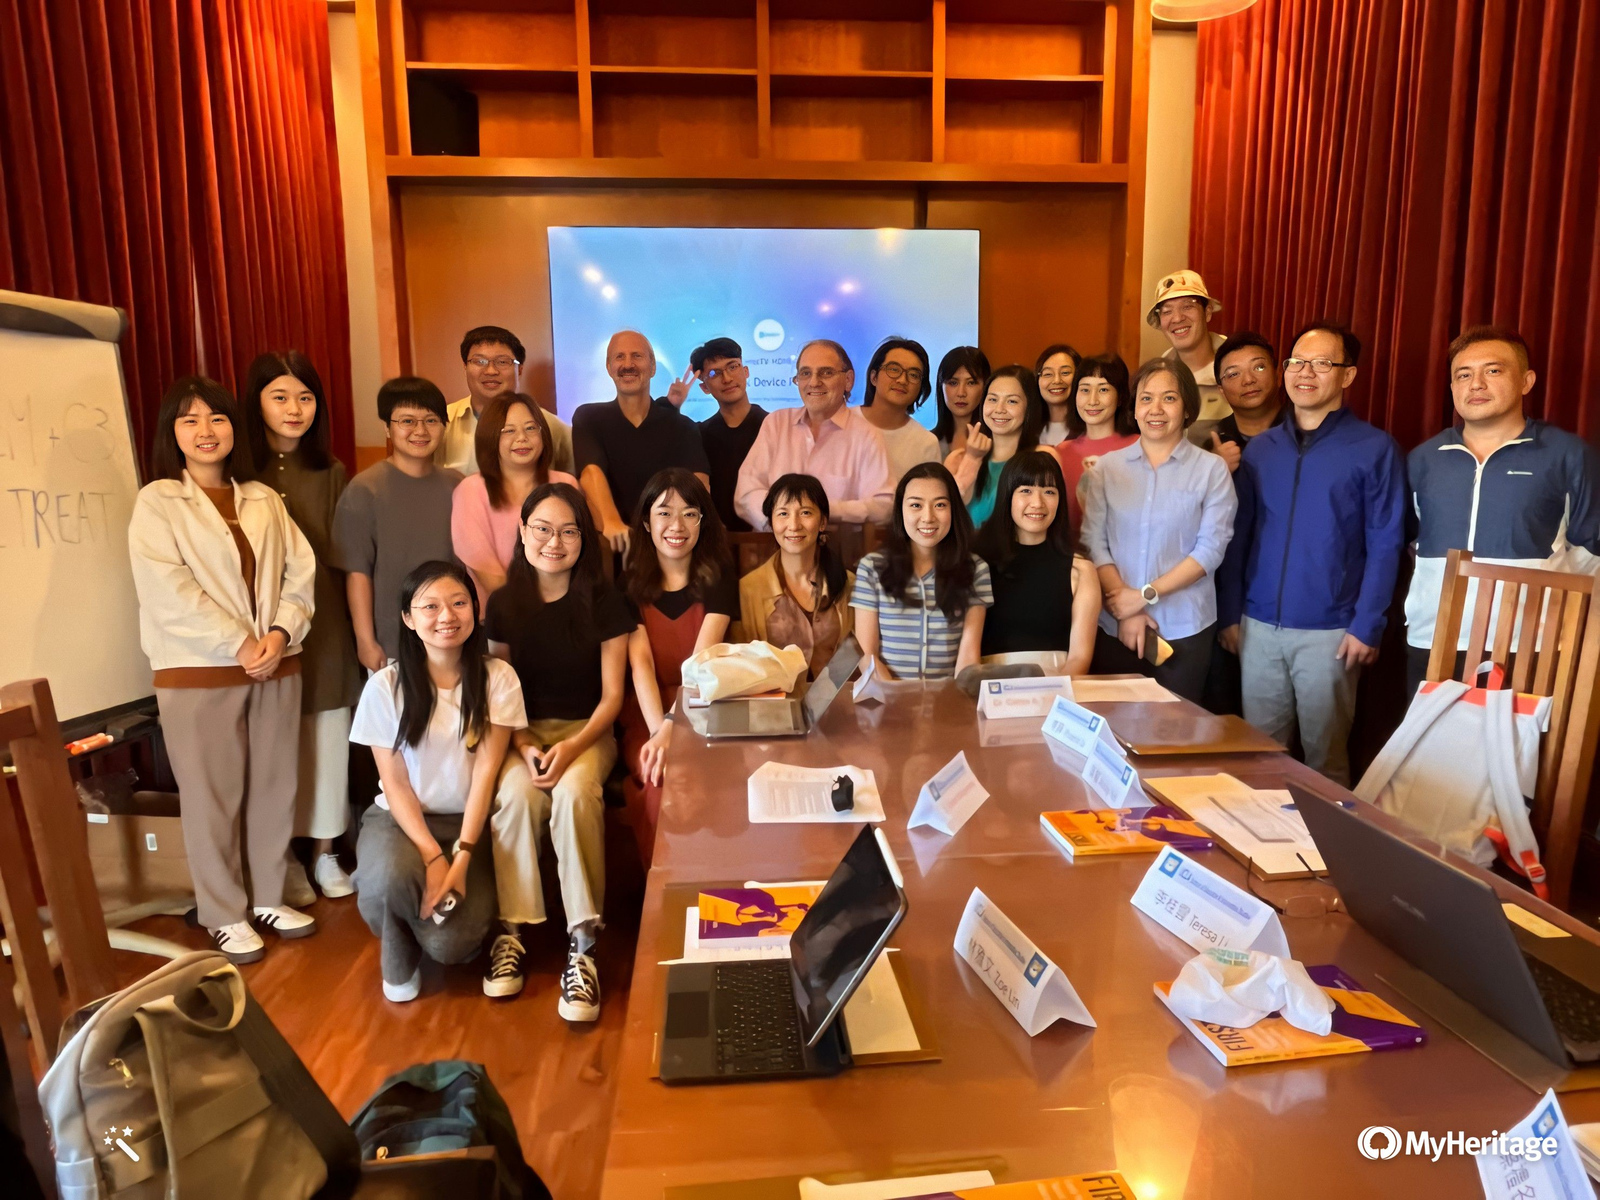 Taiwanese members participating in the Summer Program took group photos with UCLA Professor Carlos Torres and Arizona State University Professor Daniel Schugurensky.